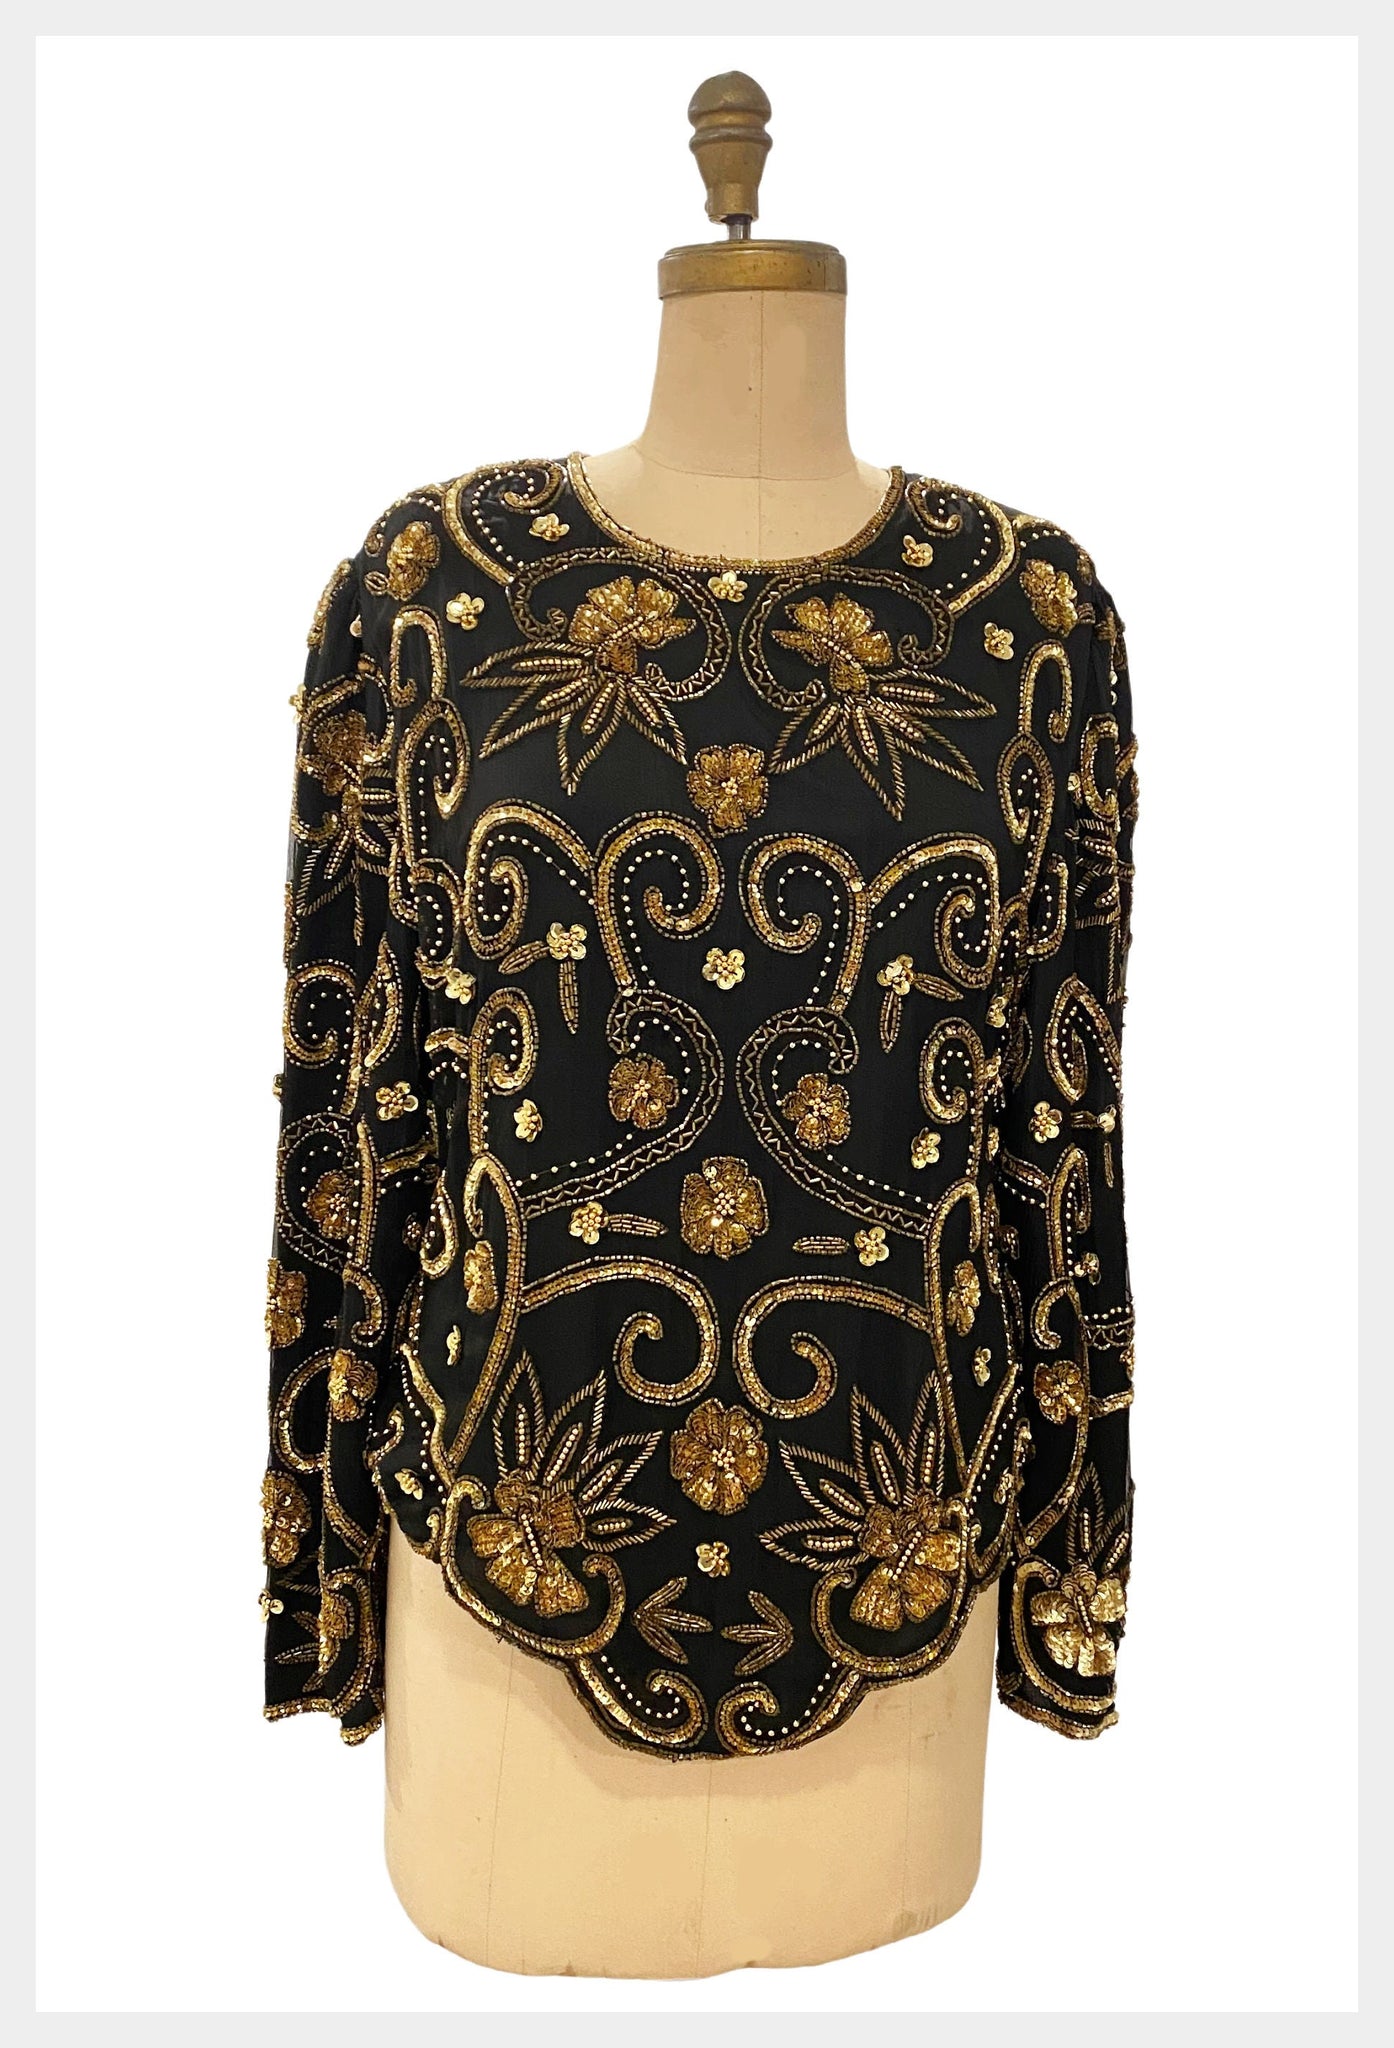 Shimmer and sparkle | 1980s SCALA designer black party top with gold beads & sequins | size medium to large